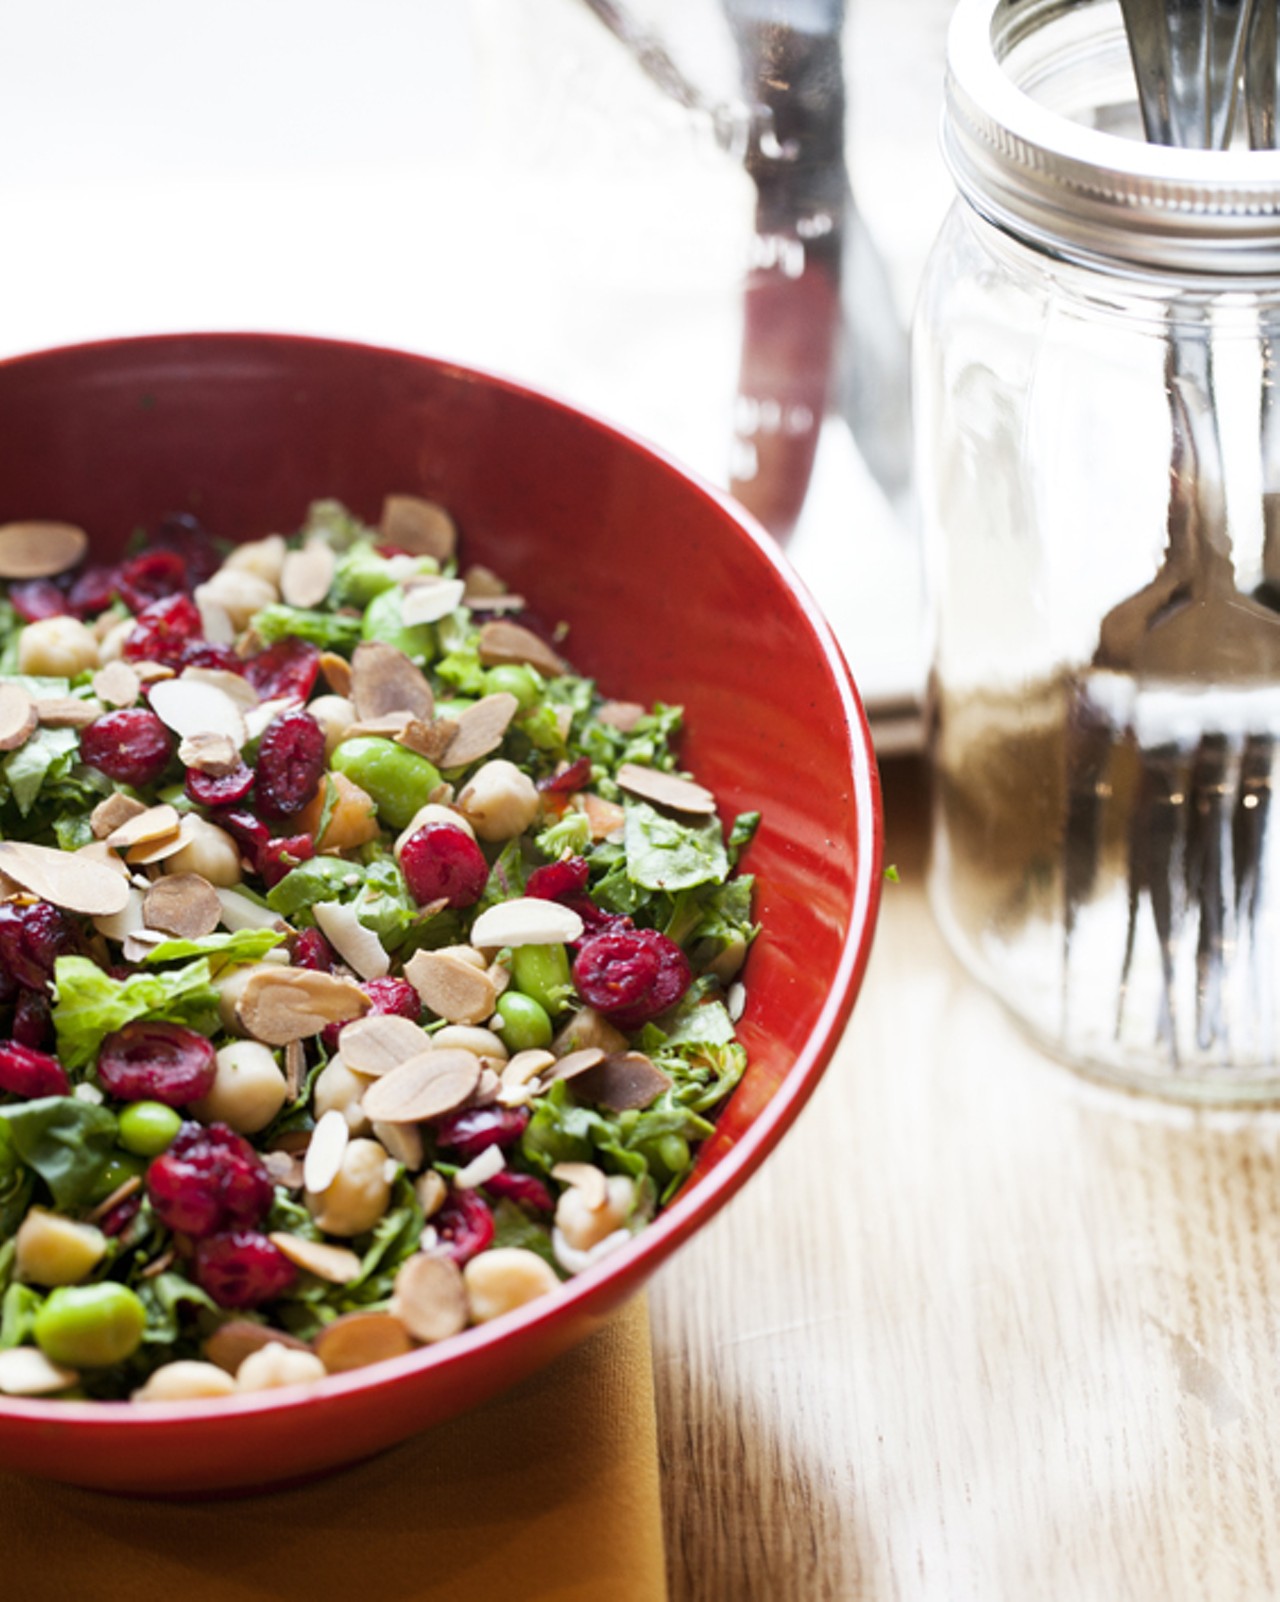 The Health Nut is broccoli, edamame, carrots, toasted almonds, dried cranberries and garbanzo beans with spinach and romaine, served with a raspberry vinaigrette.